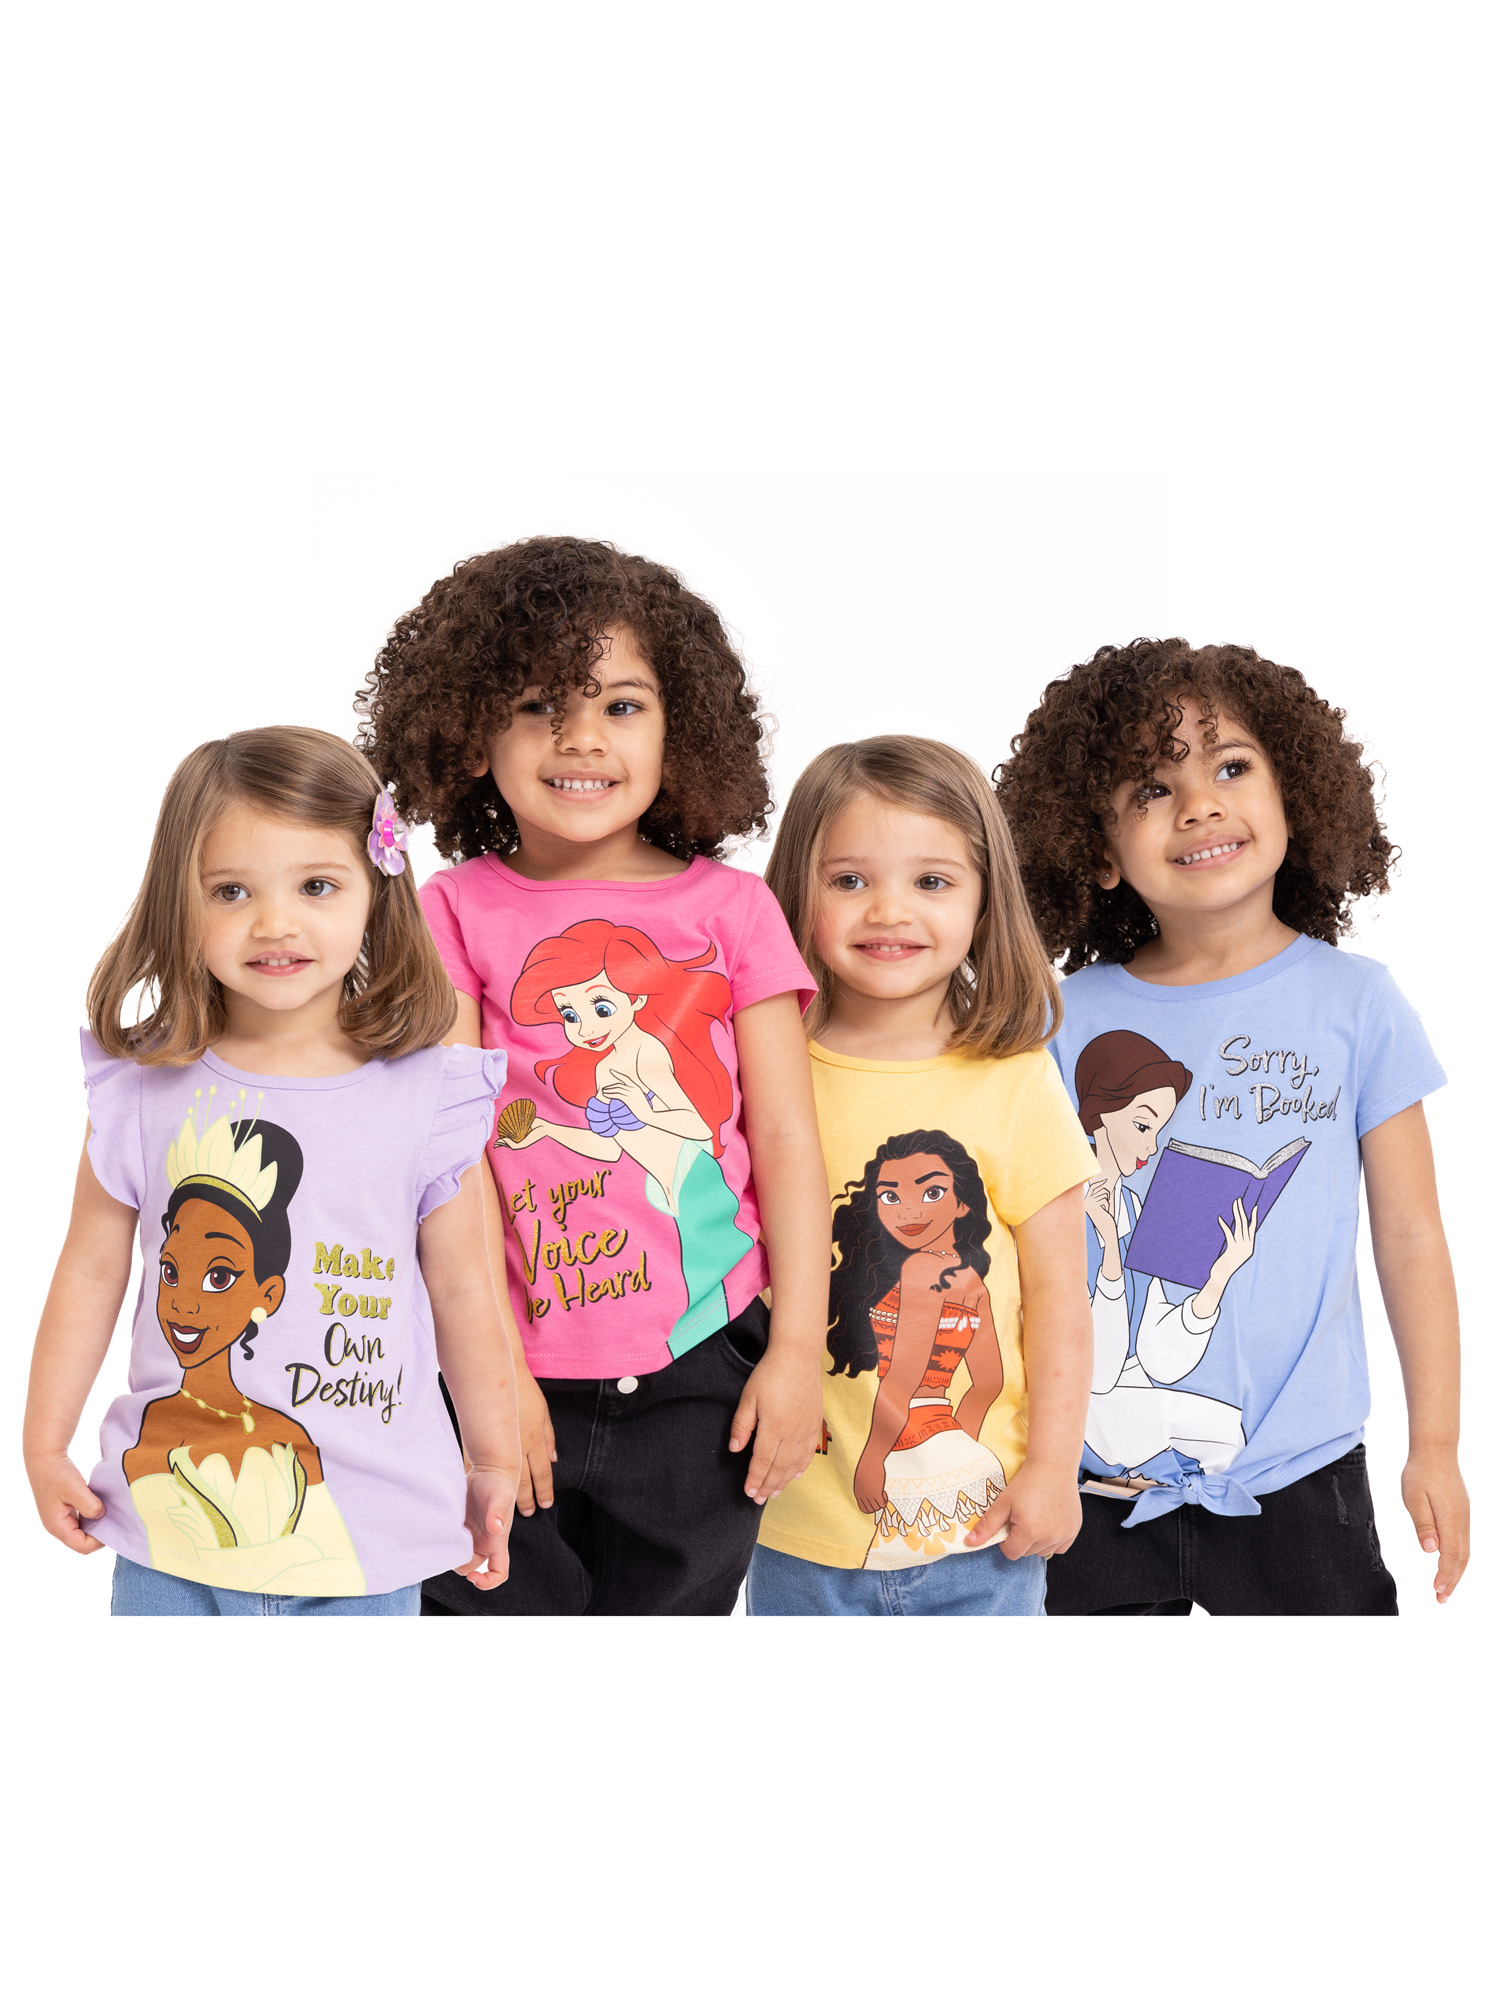 Disney Princess Toddler Girls Fashion T-Shirts with Short Sleeves, 4-Pack, Sizes 2T-5T - image 2 of 9